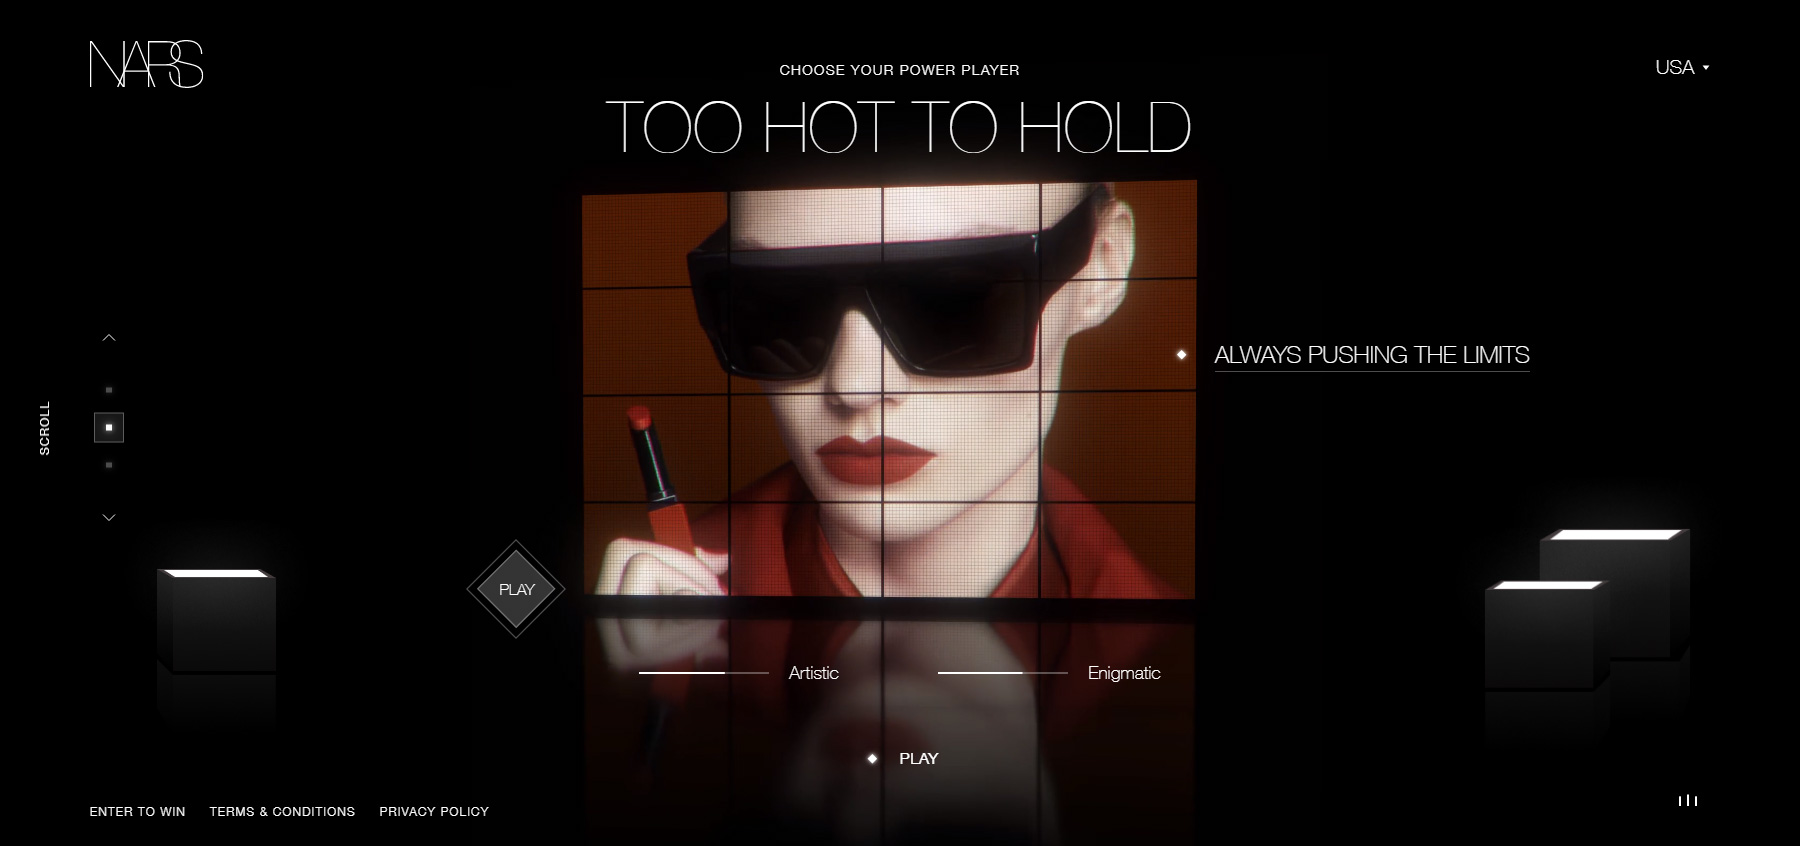 NARS - Play Your Power - Website of the Month